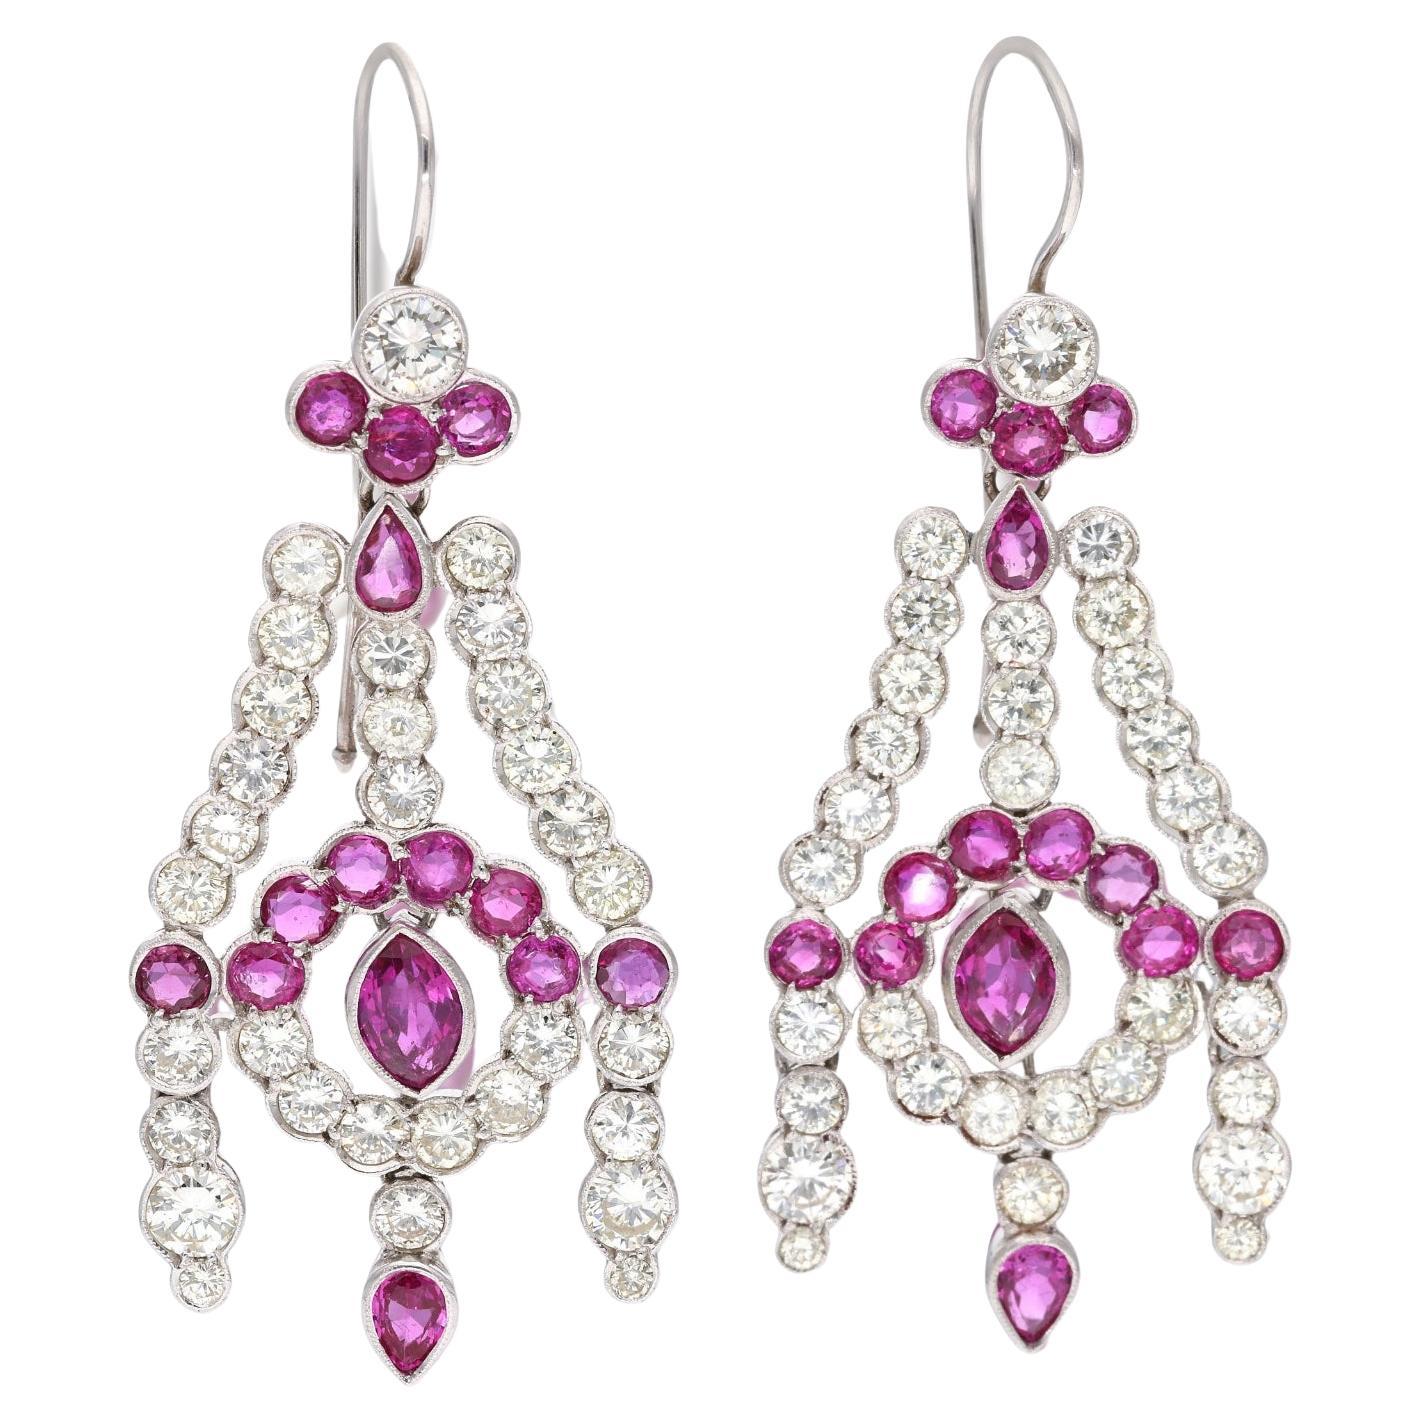 White Gold, Ruby, and Diamond Chandelier Earrings